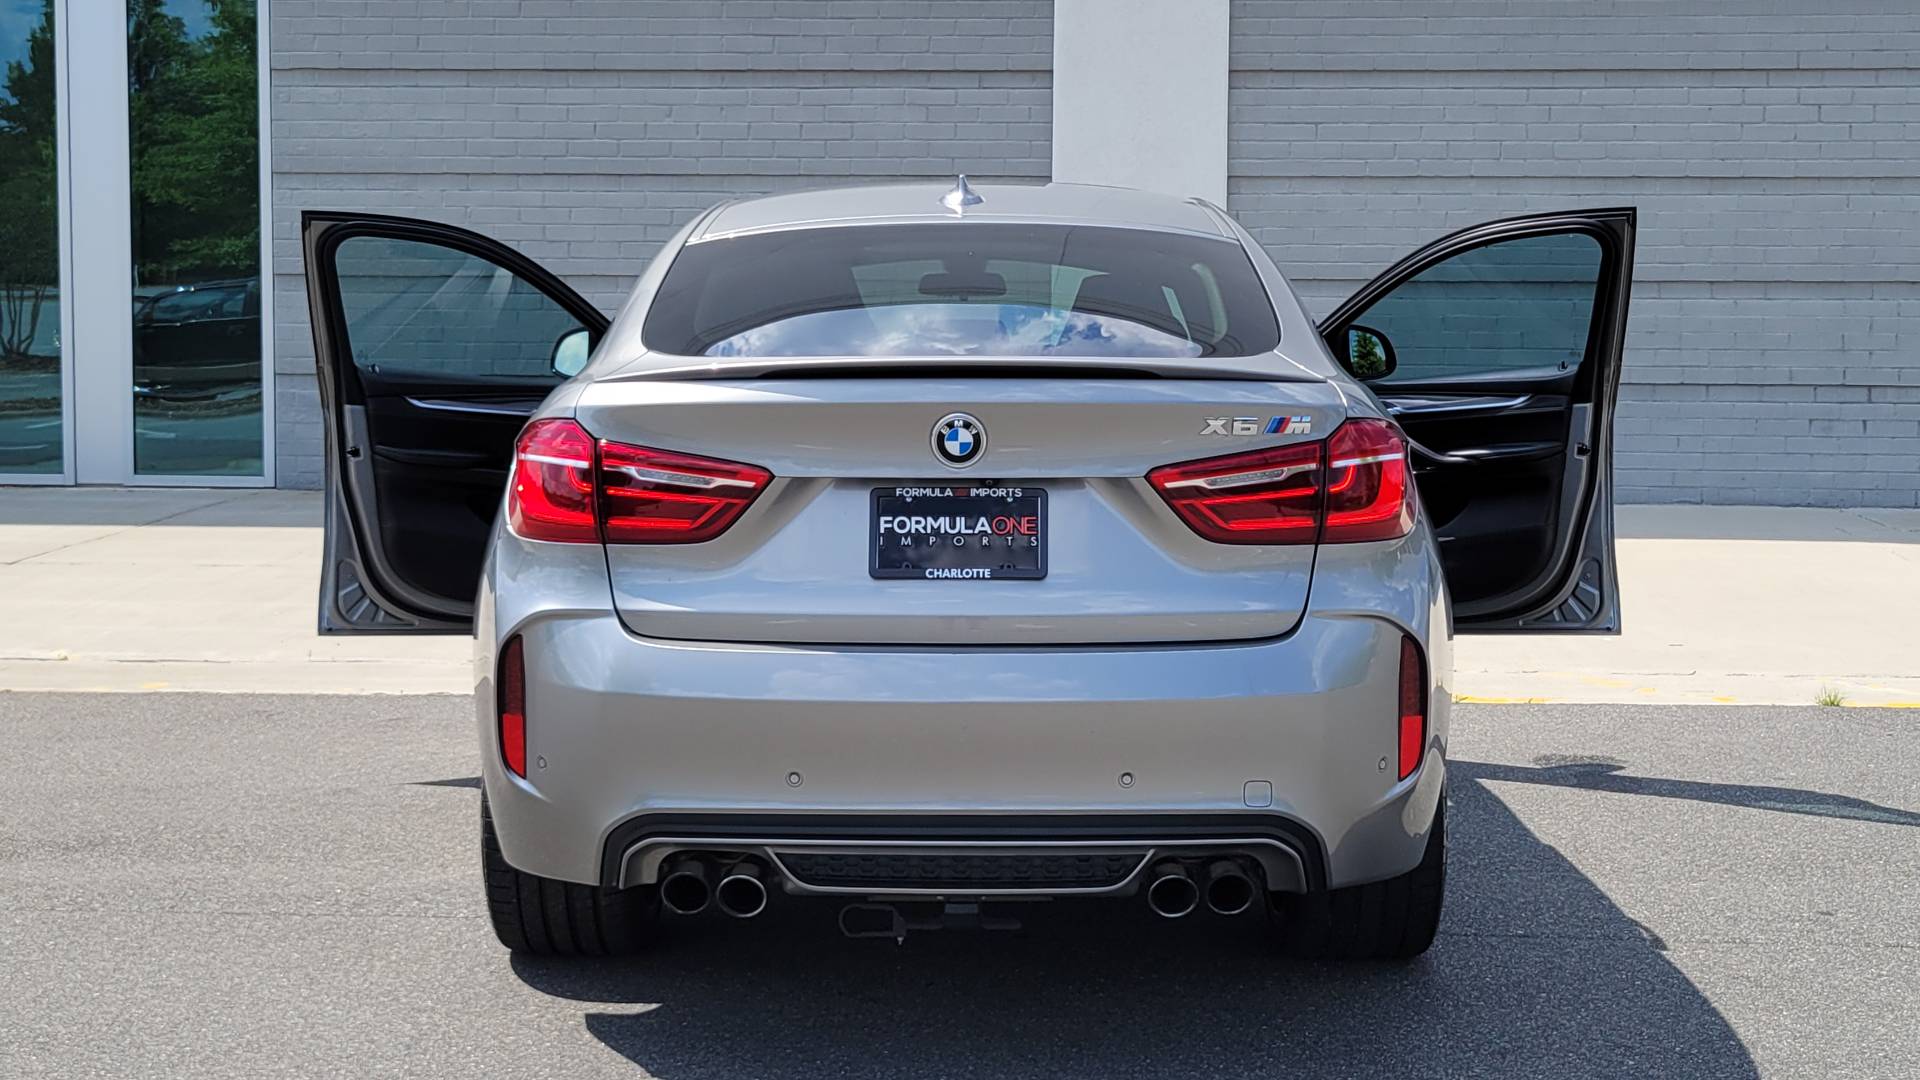 Used 2016 BMW X6 M 567HP / EXECUTIVE / DRVR ASST / PARK ASST / NAV / SUNROOF / CAMERA for sale $49,995 at Formula Imports in Charlotte NC 28227 29